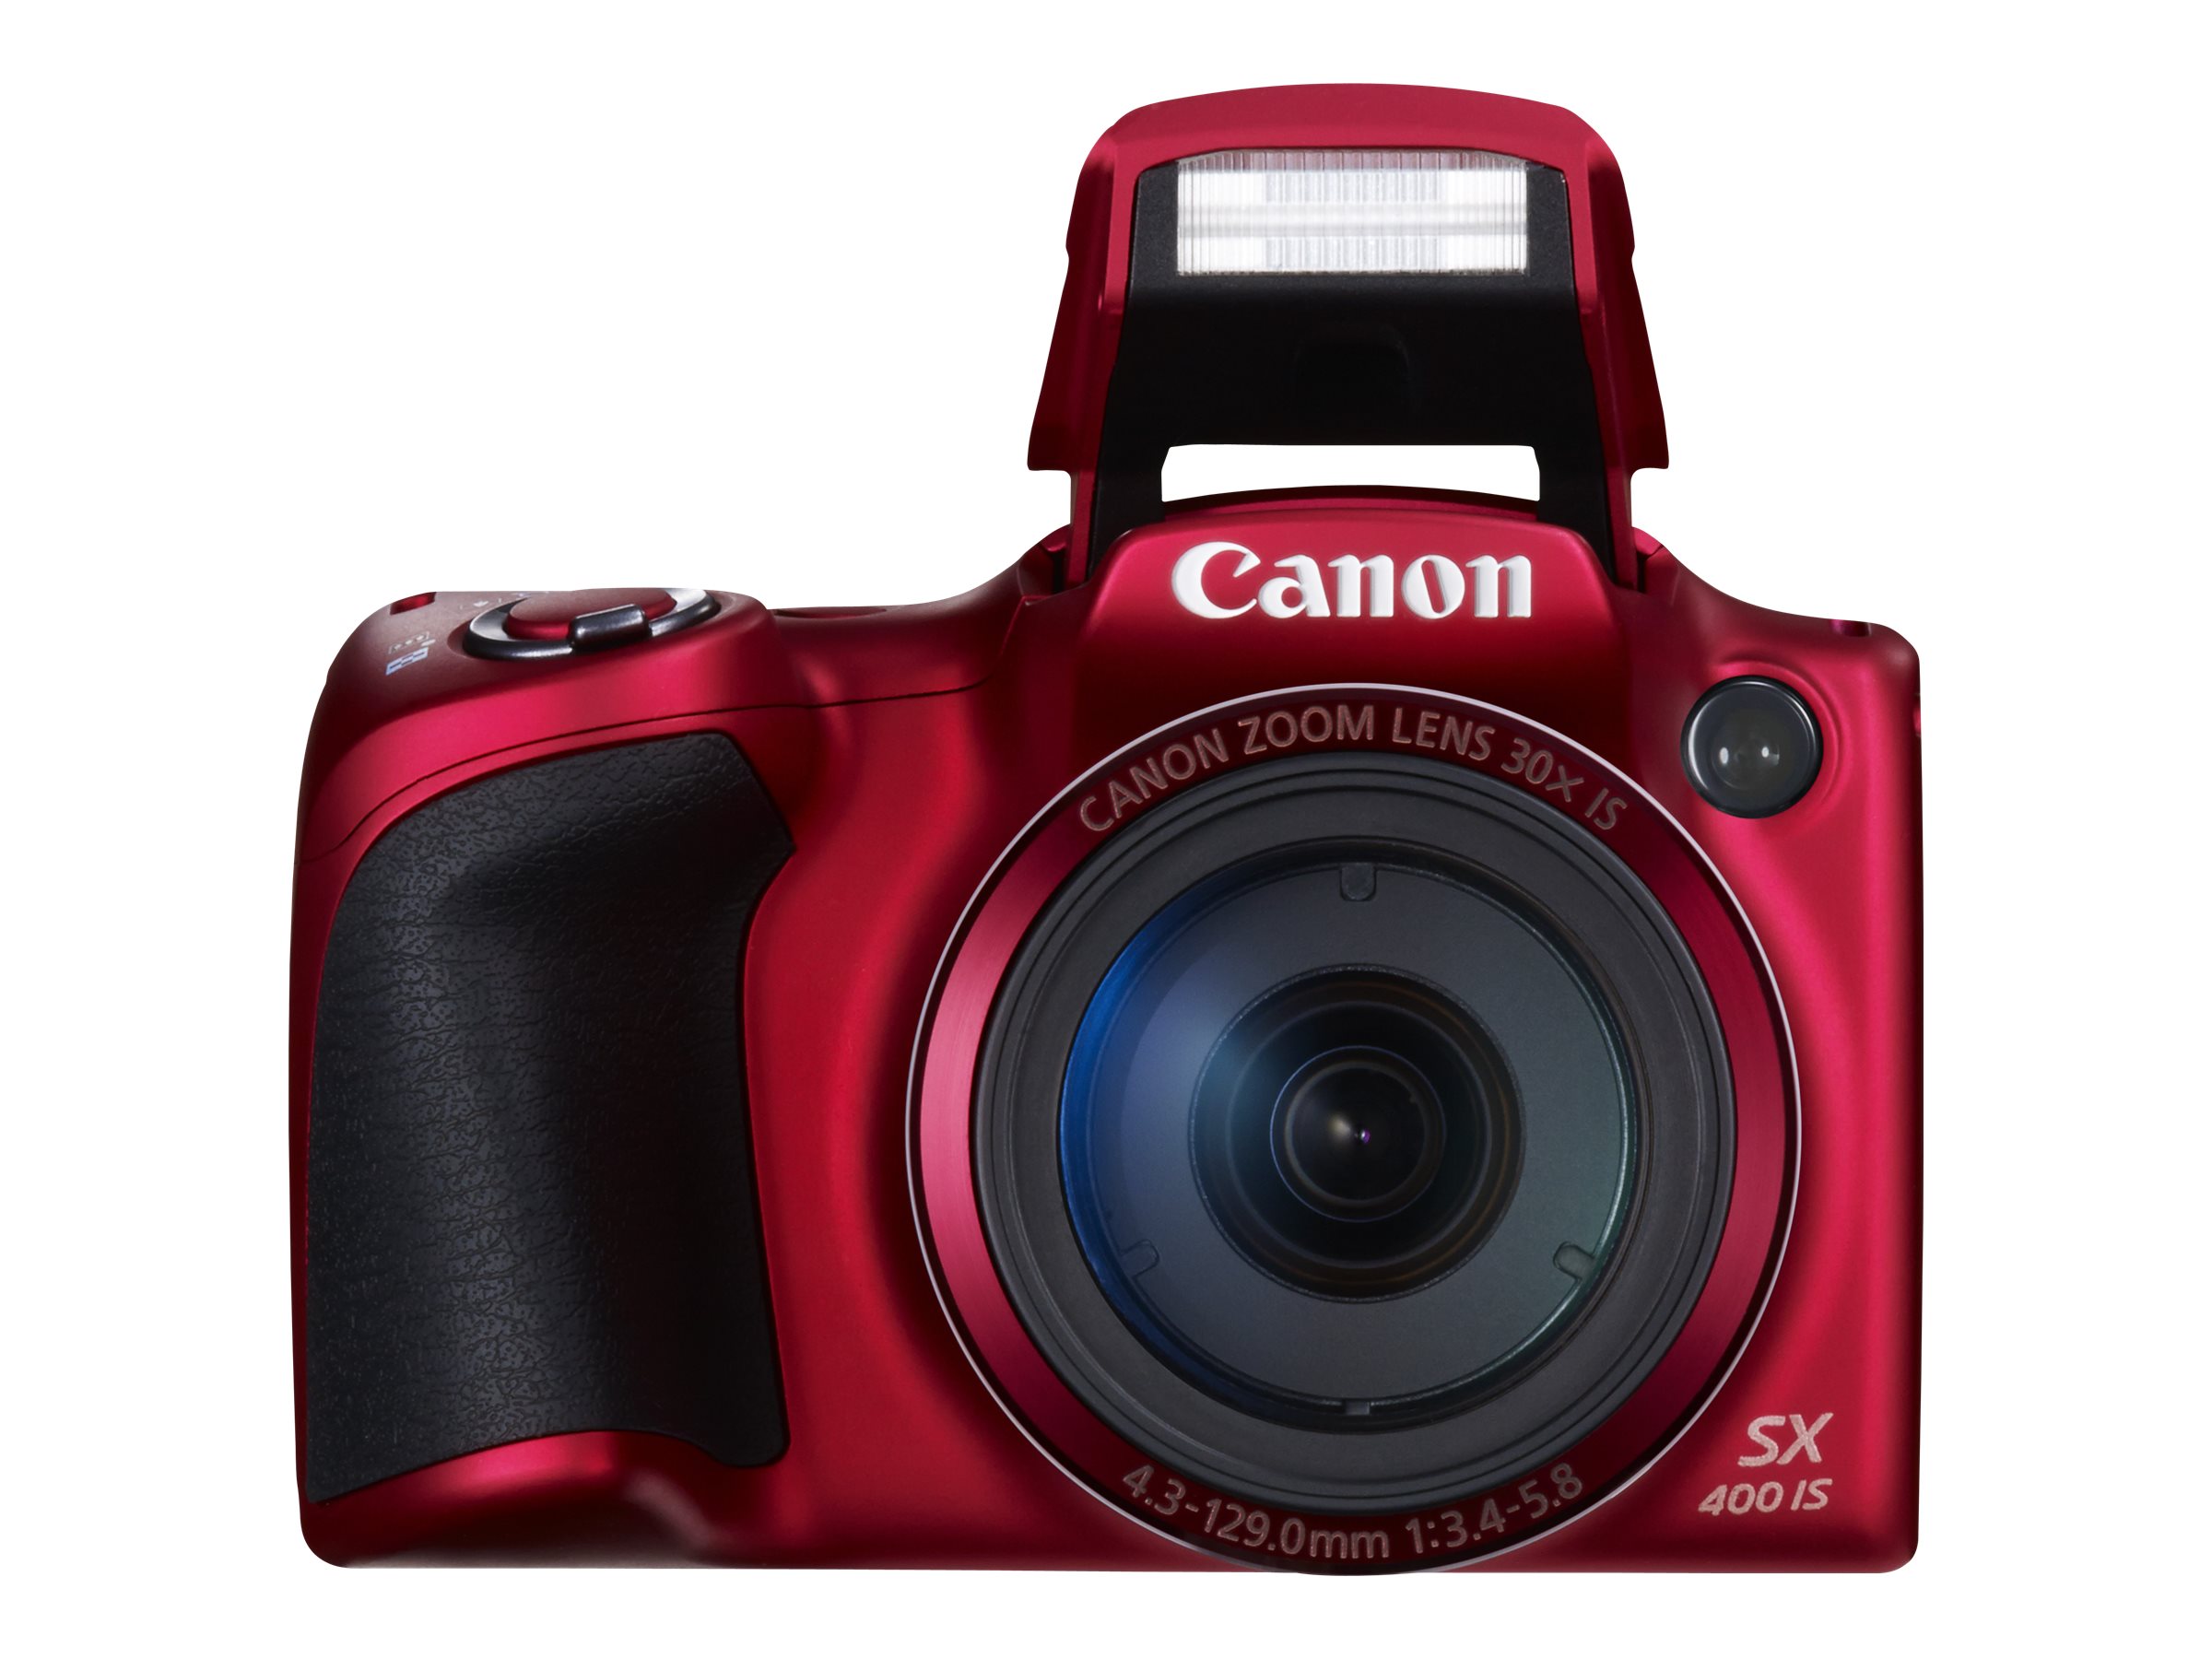 Canon PowerShot SX400 IS - Digital camera - High Definition - compact - 16.0 MP - 30 x optical zoom - red - image 14 of 72